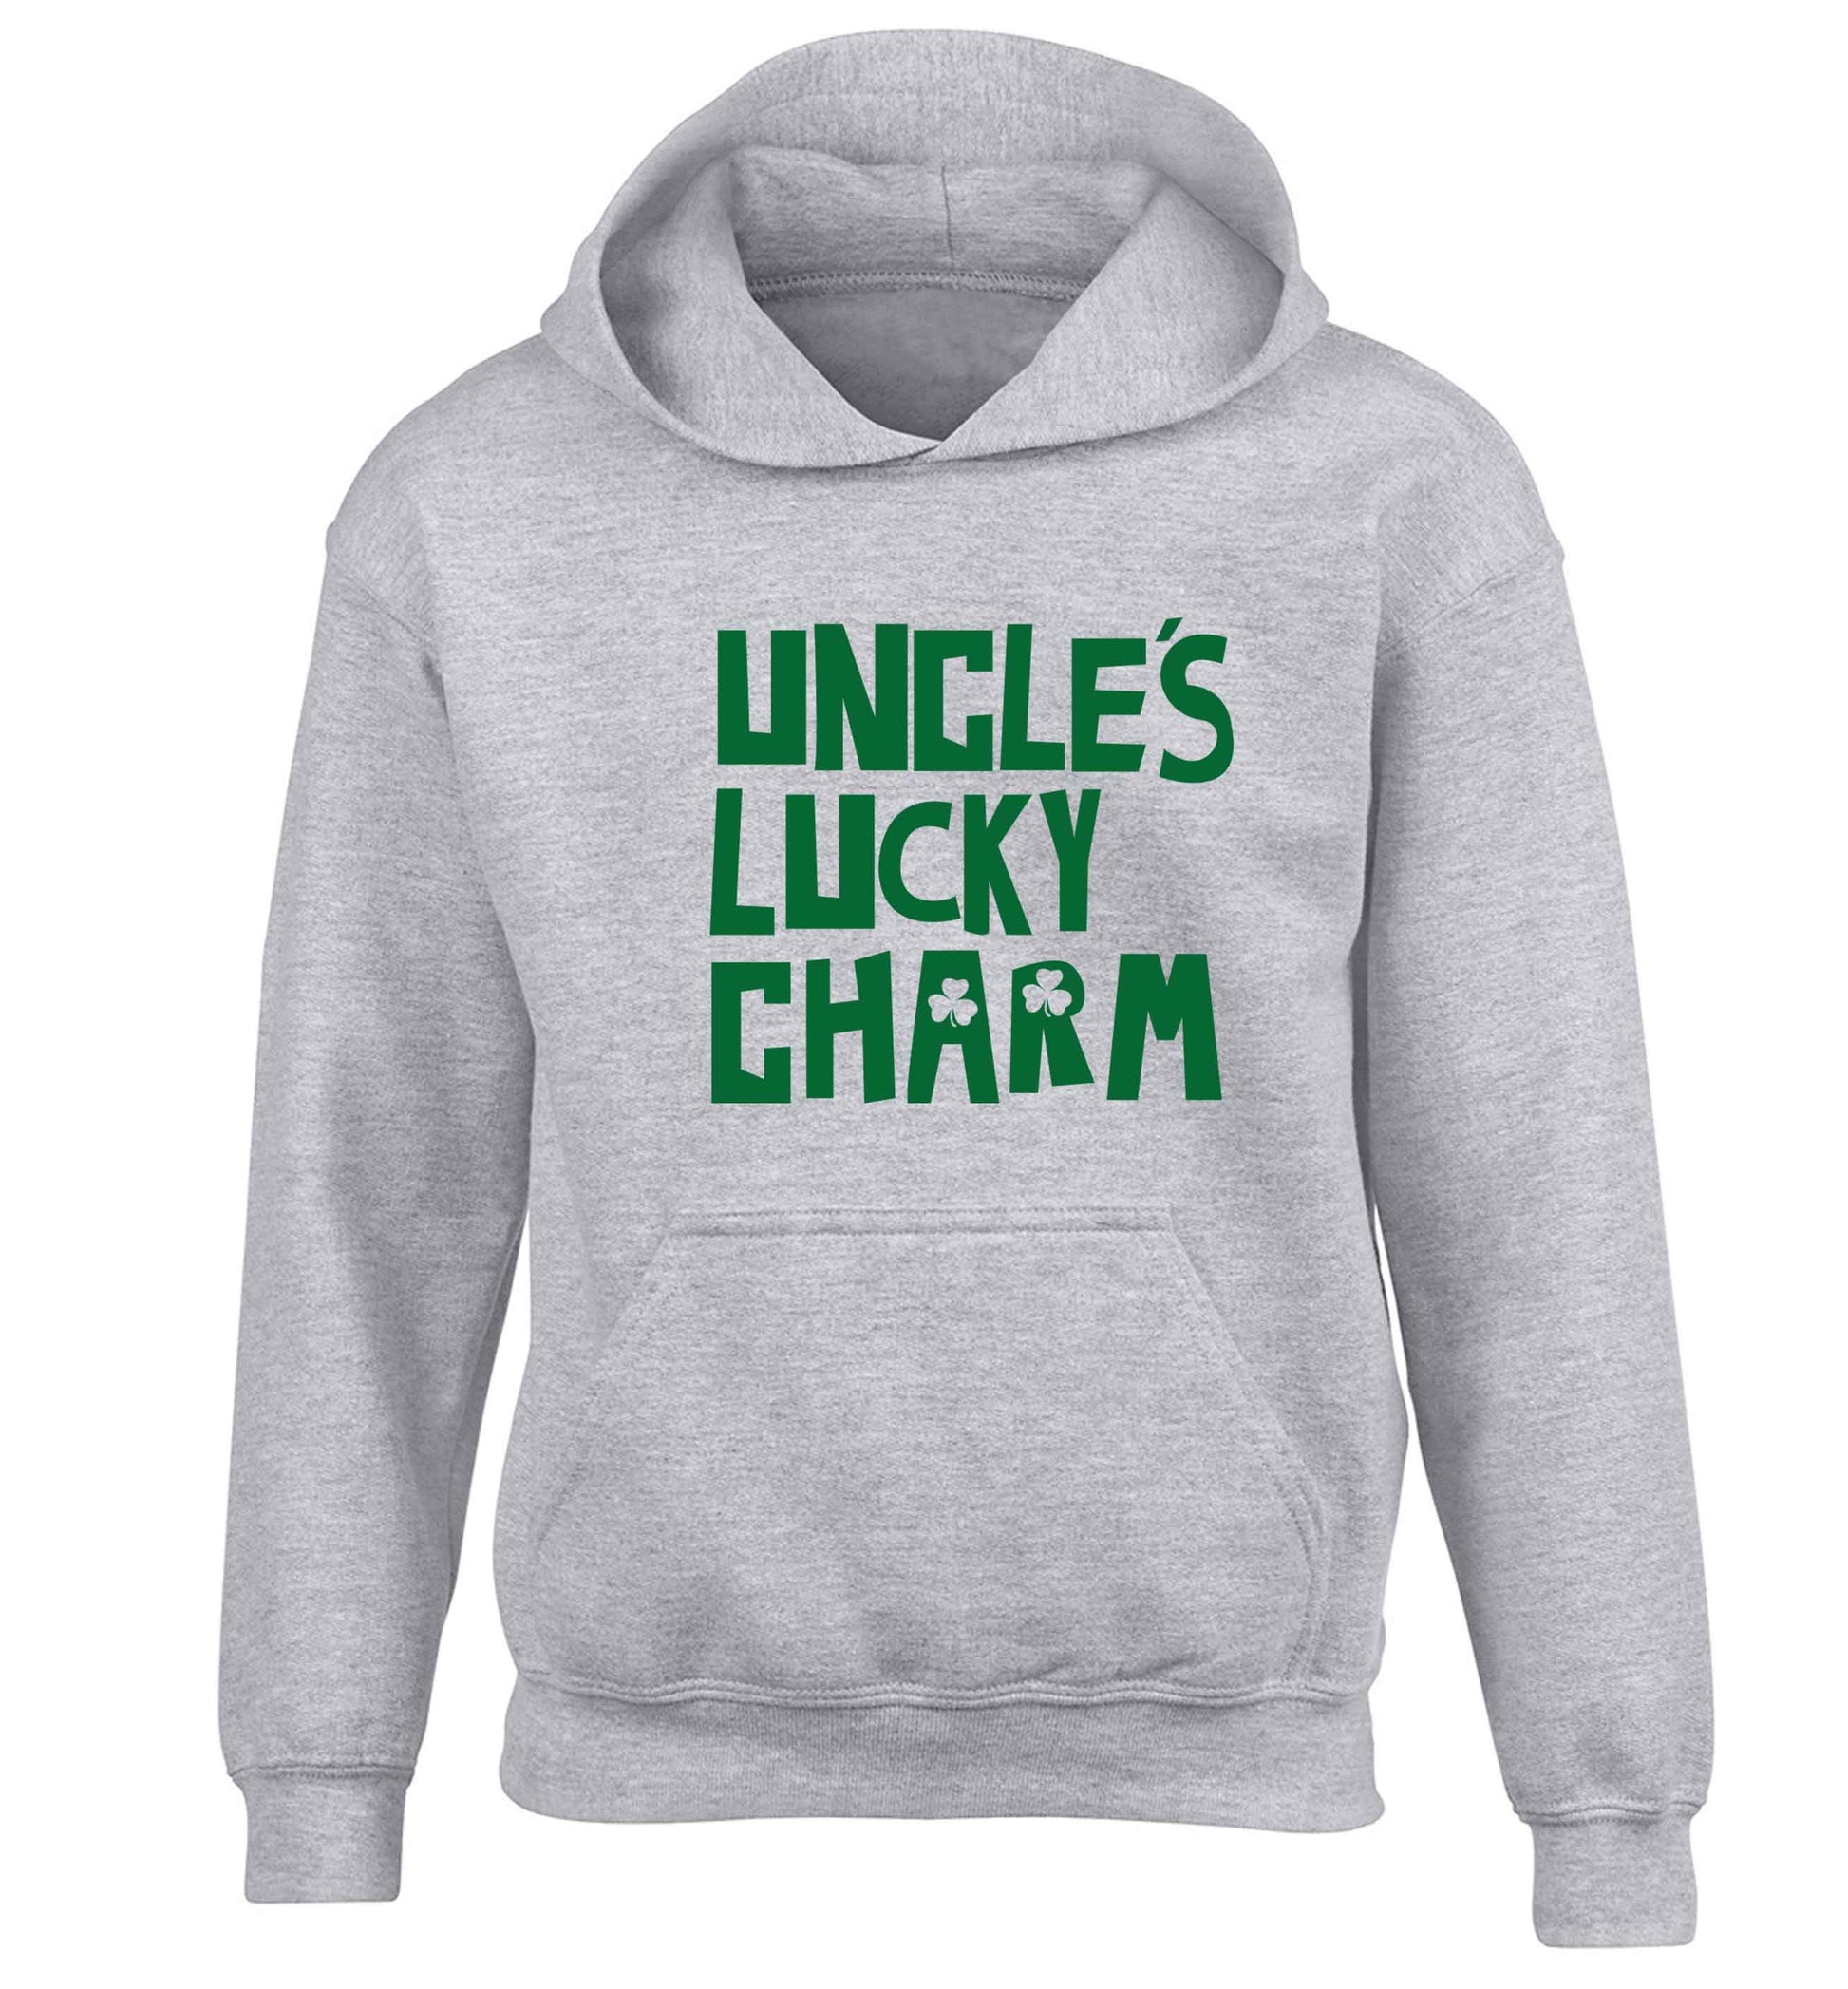 Uncles lucky charm children's grey hoodie 12-13 Years